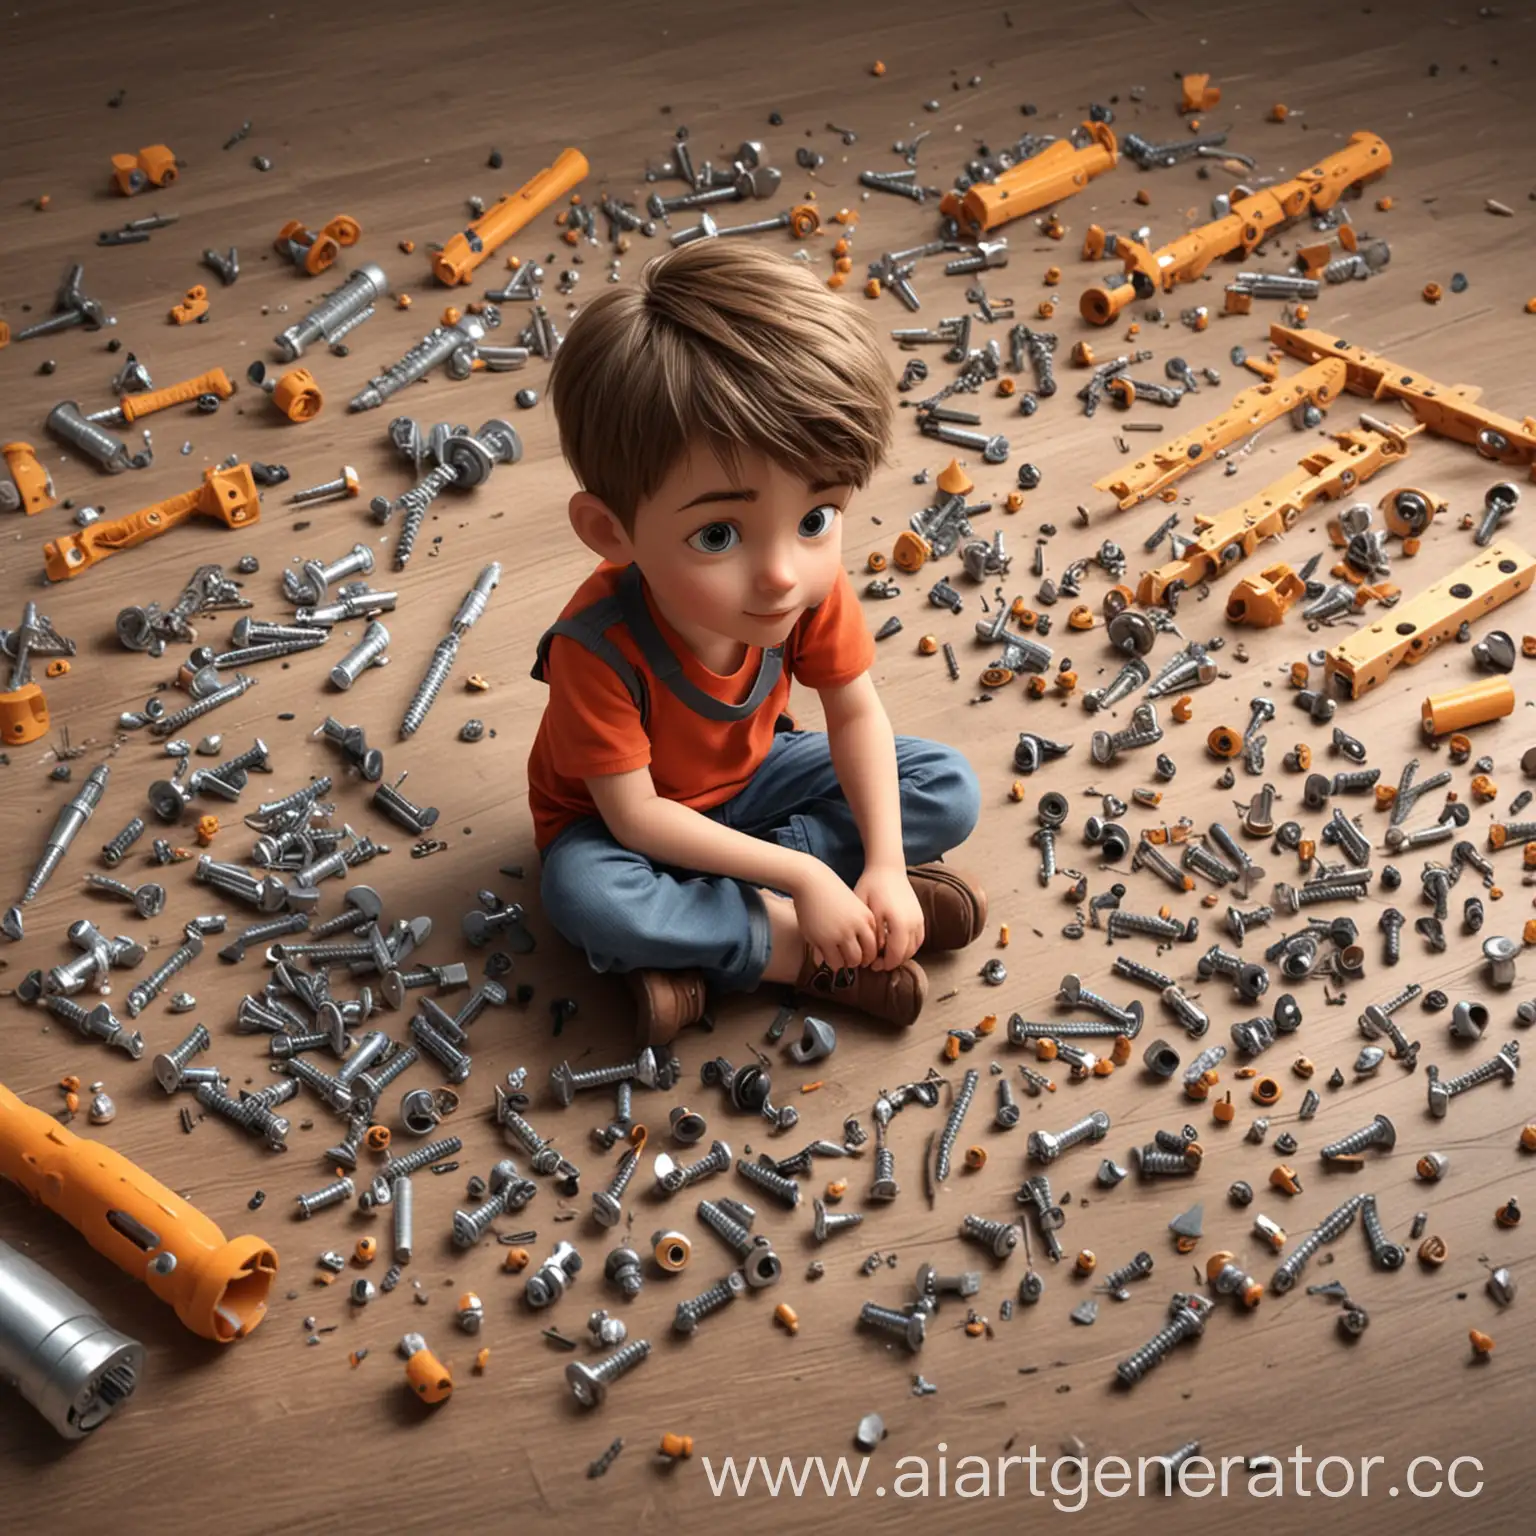 A boy sitting on the floor assembling a constructor, screws and bolts scattered around, animation drawing, caricature